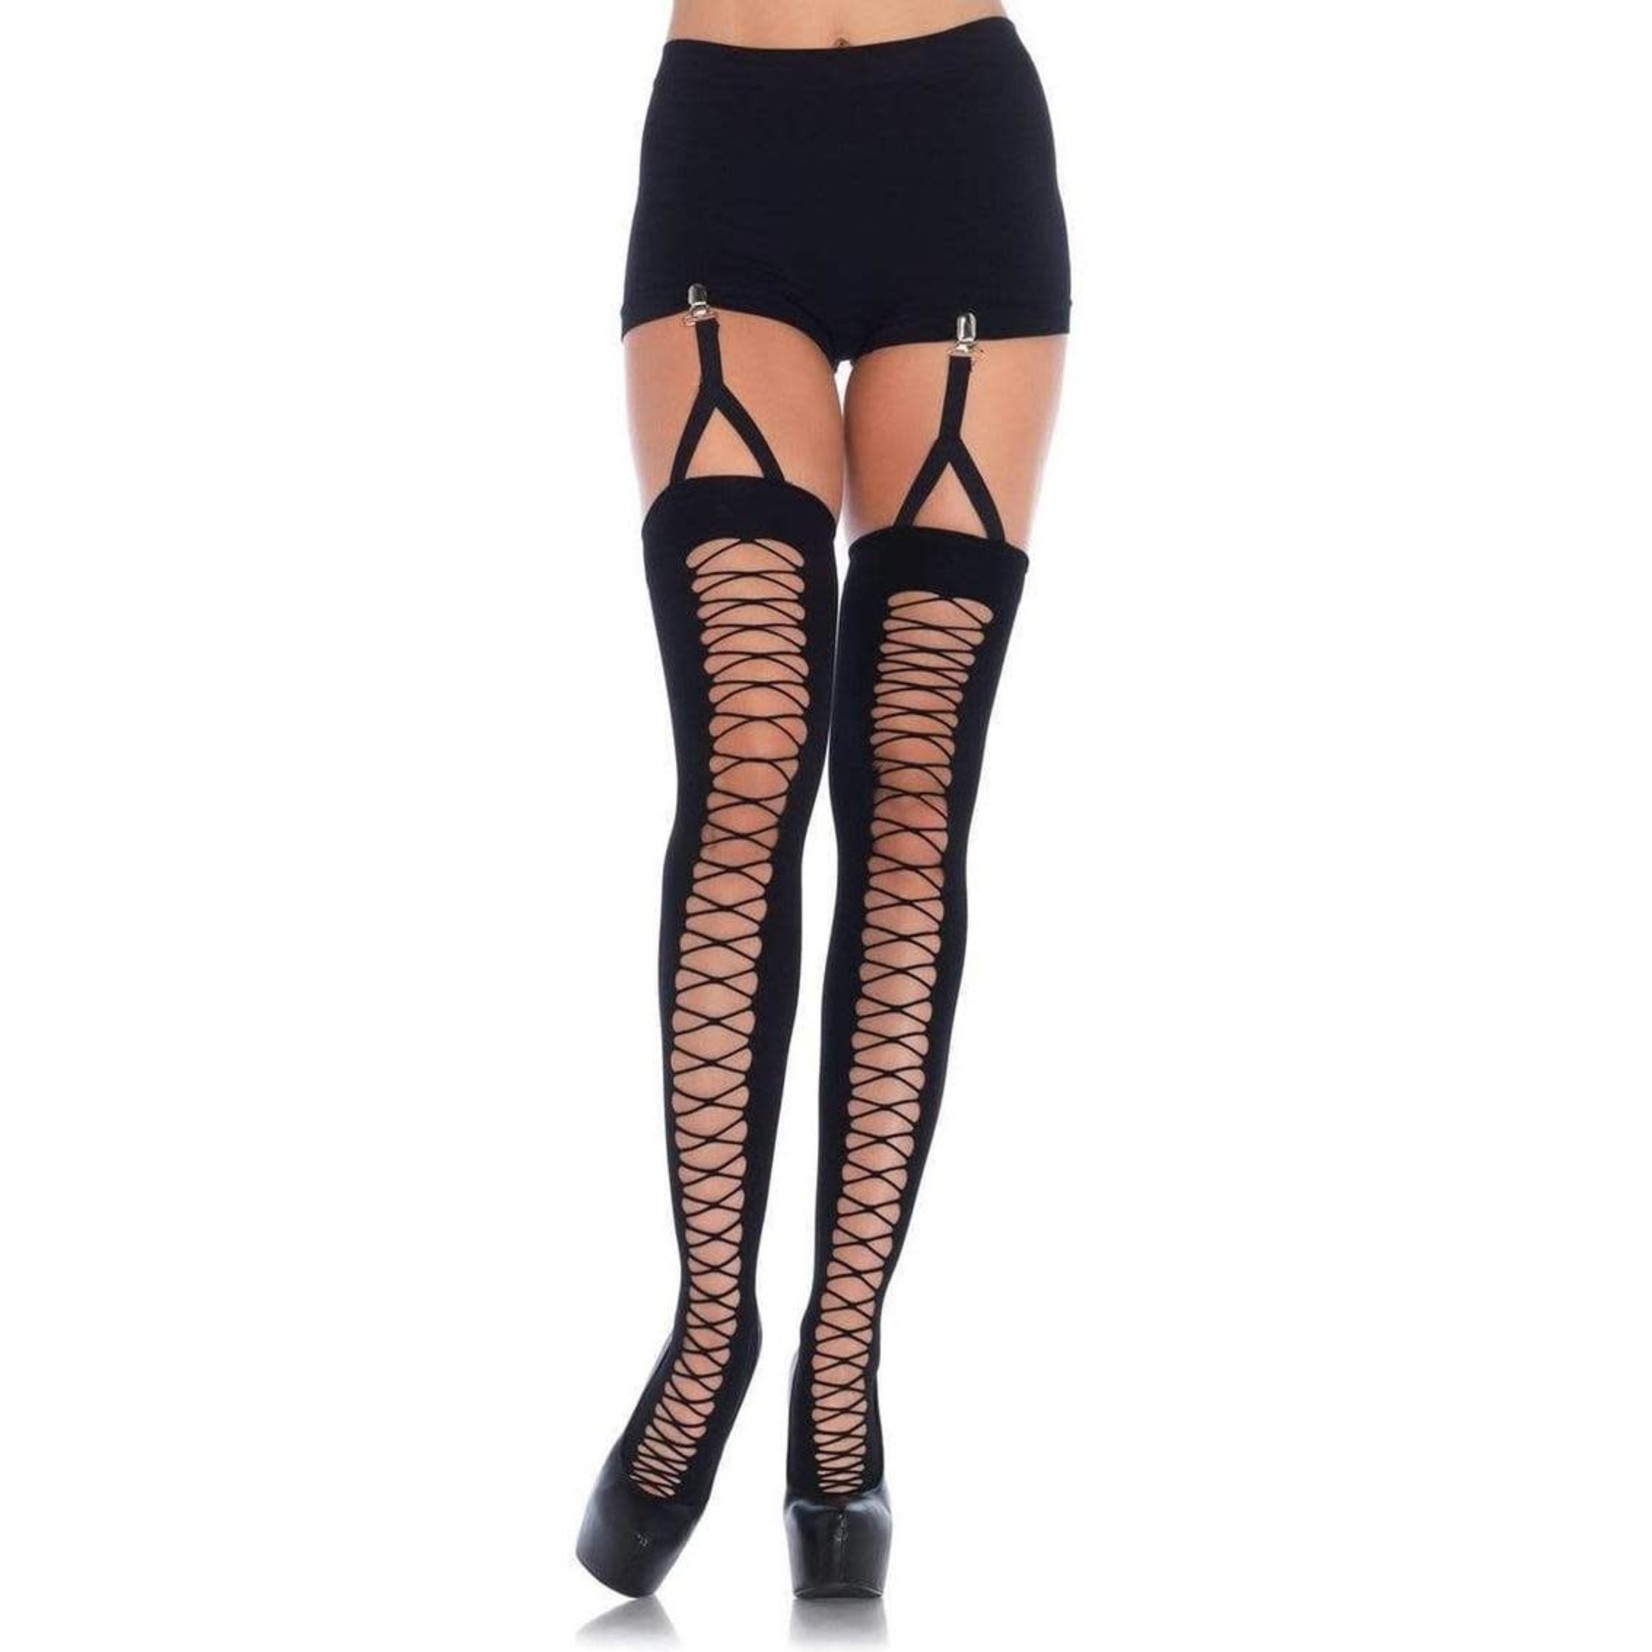 Leg Avenue Lace Up Illusion Opaque Thigh High with Attached Clip Garter - Black